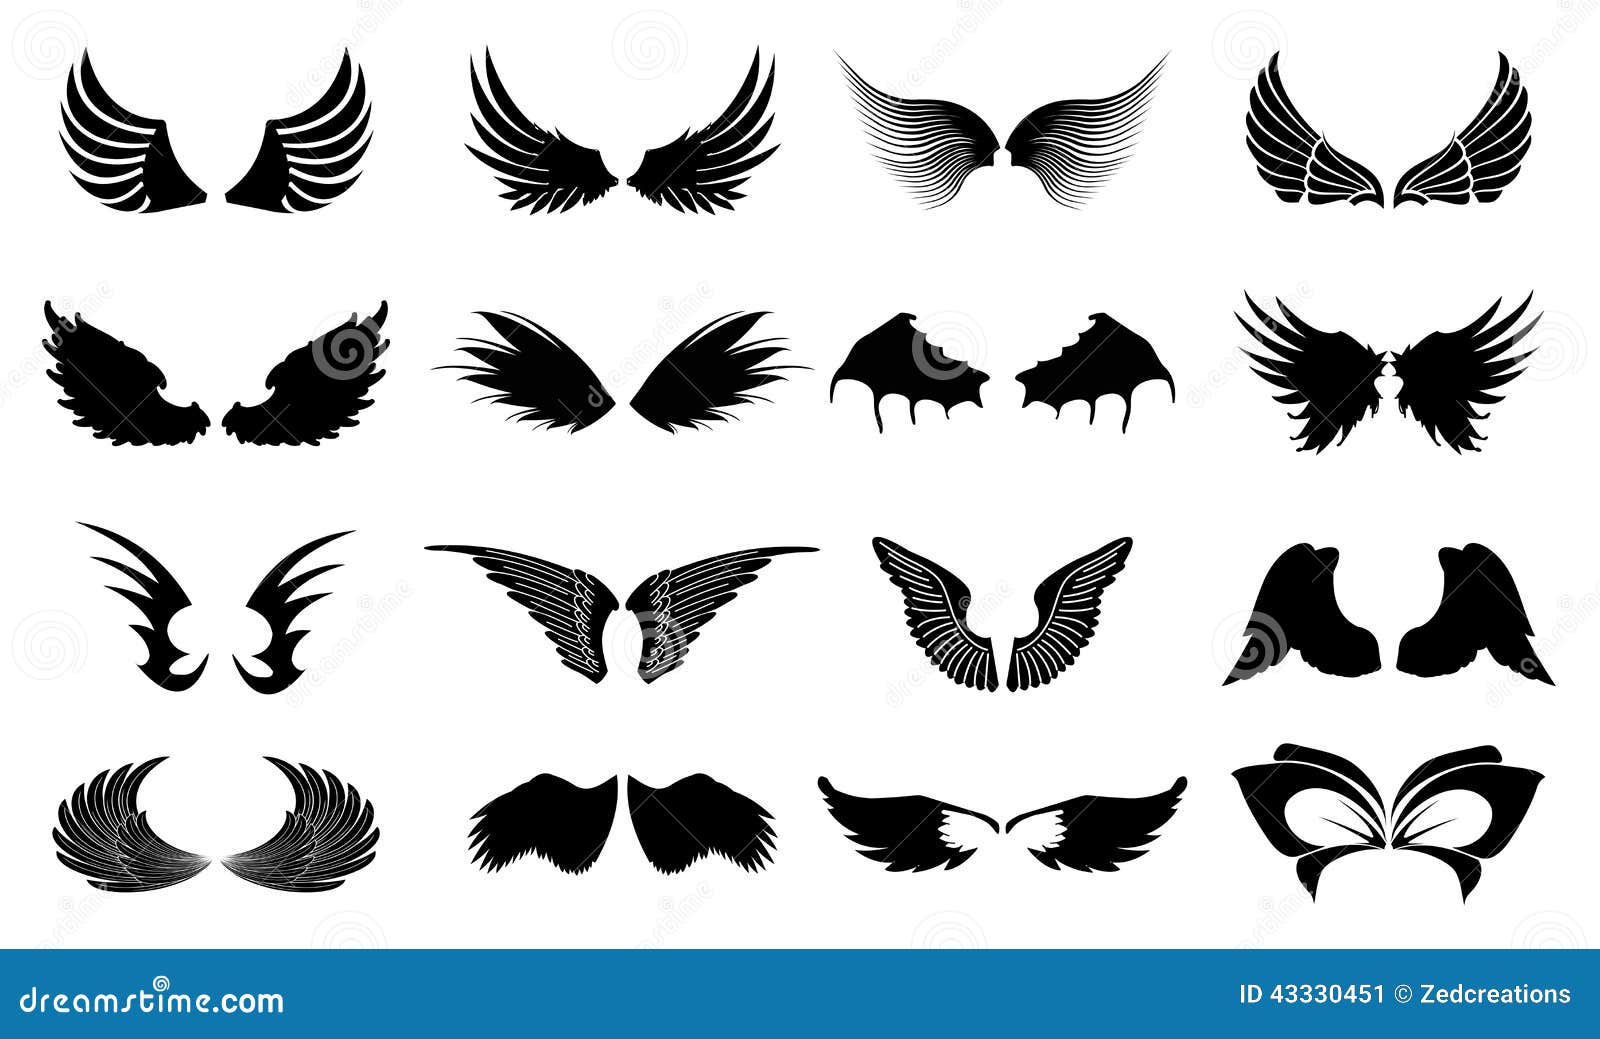 wings icons